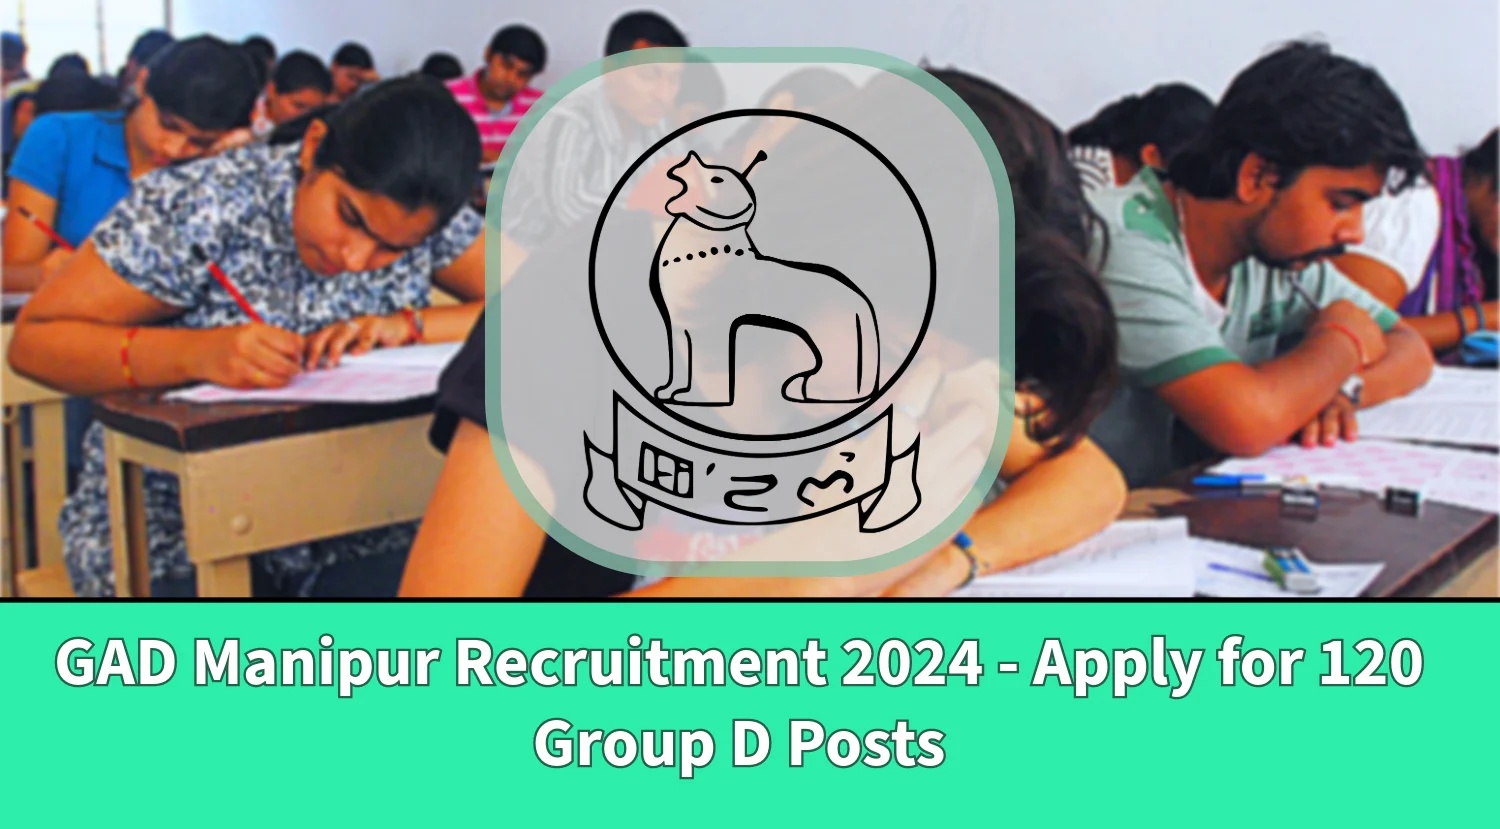 GAD Manipur Recruitment 2024 - Apply for 120 Group D Posts